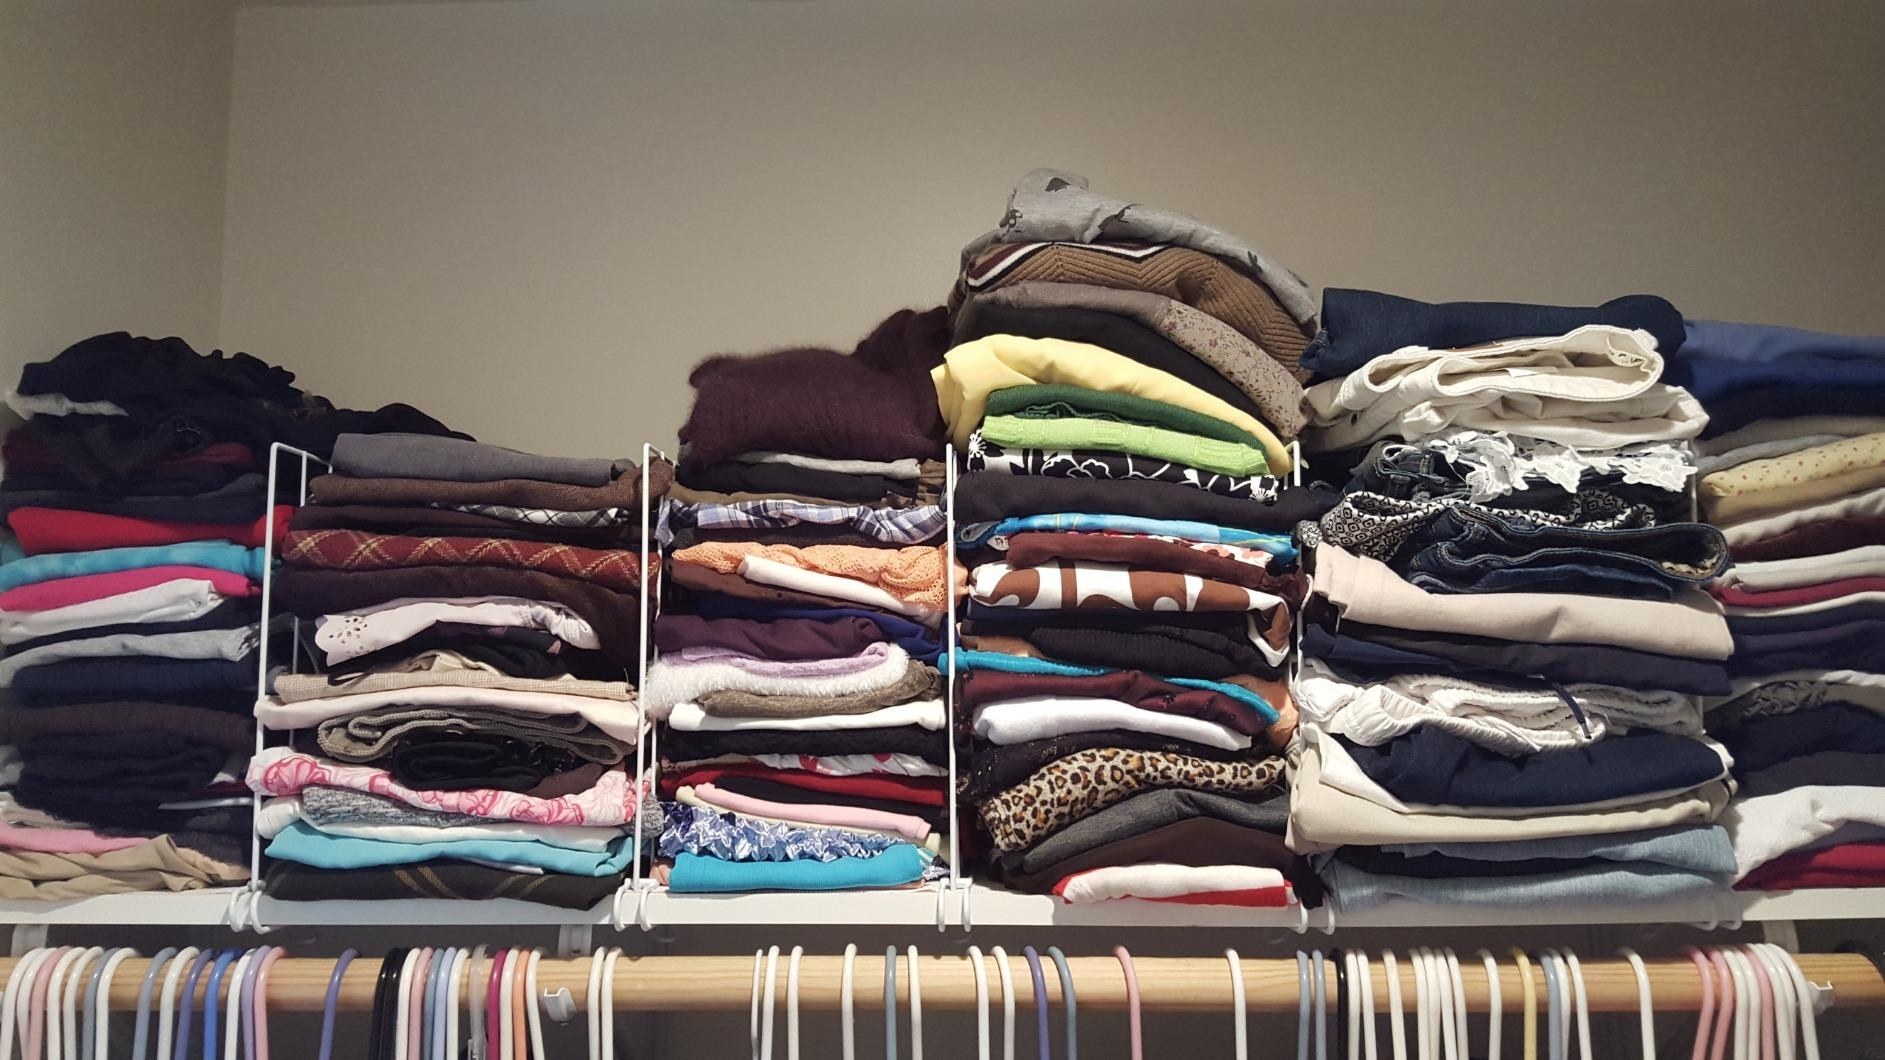 21 Products To Help Make Storing Your Clothes A Breeze